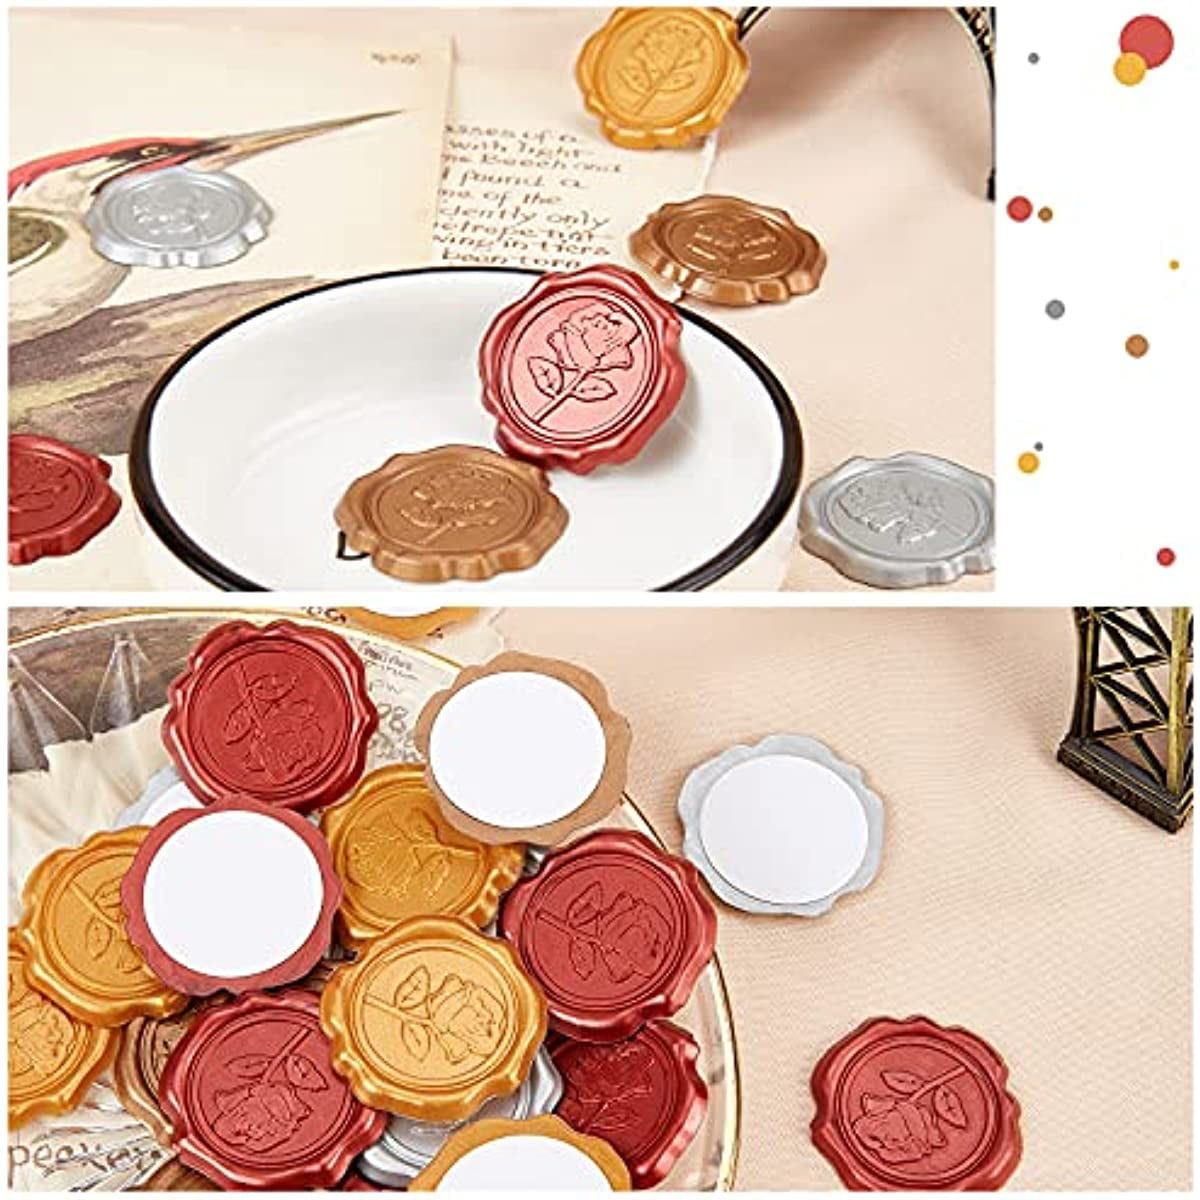 Reindeer Adhesive Wax Seal Stickers 25pk - Pre-Made from Real Sealing Wax (Crimson Red)